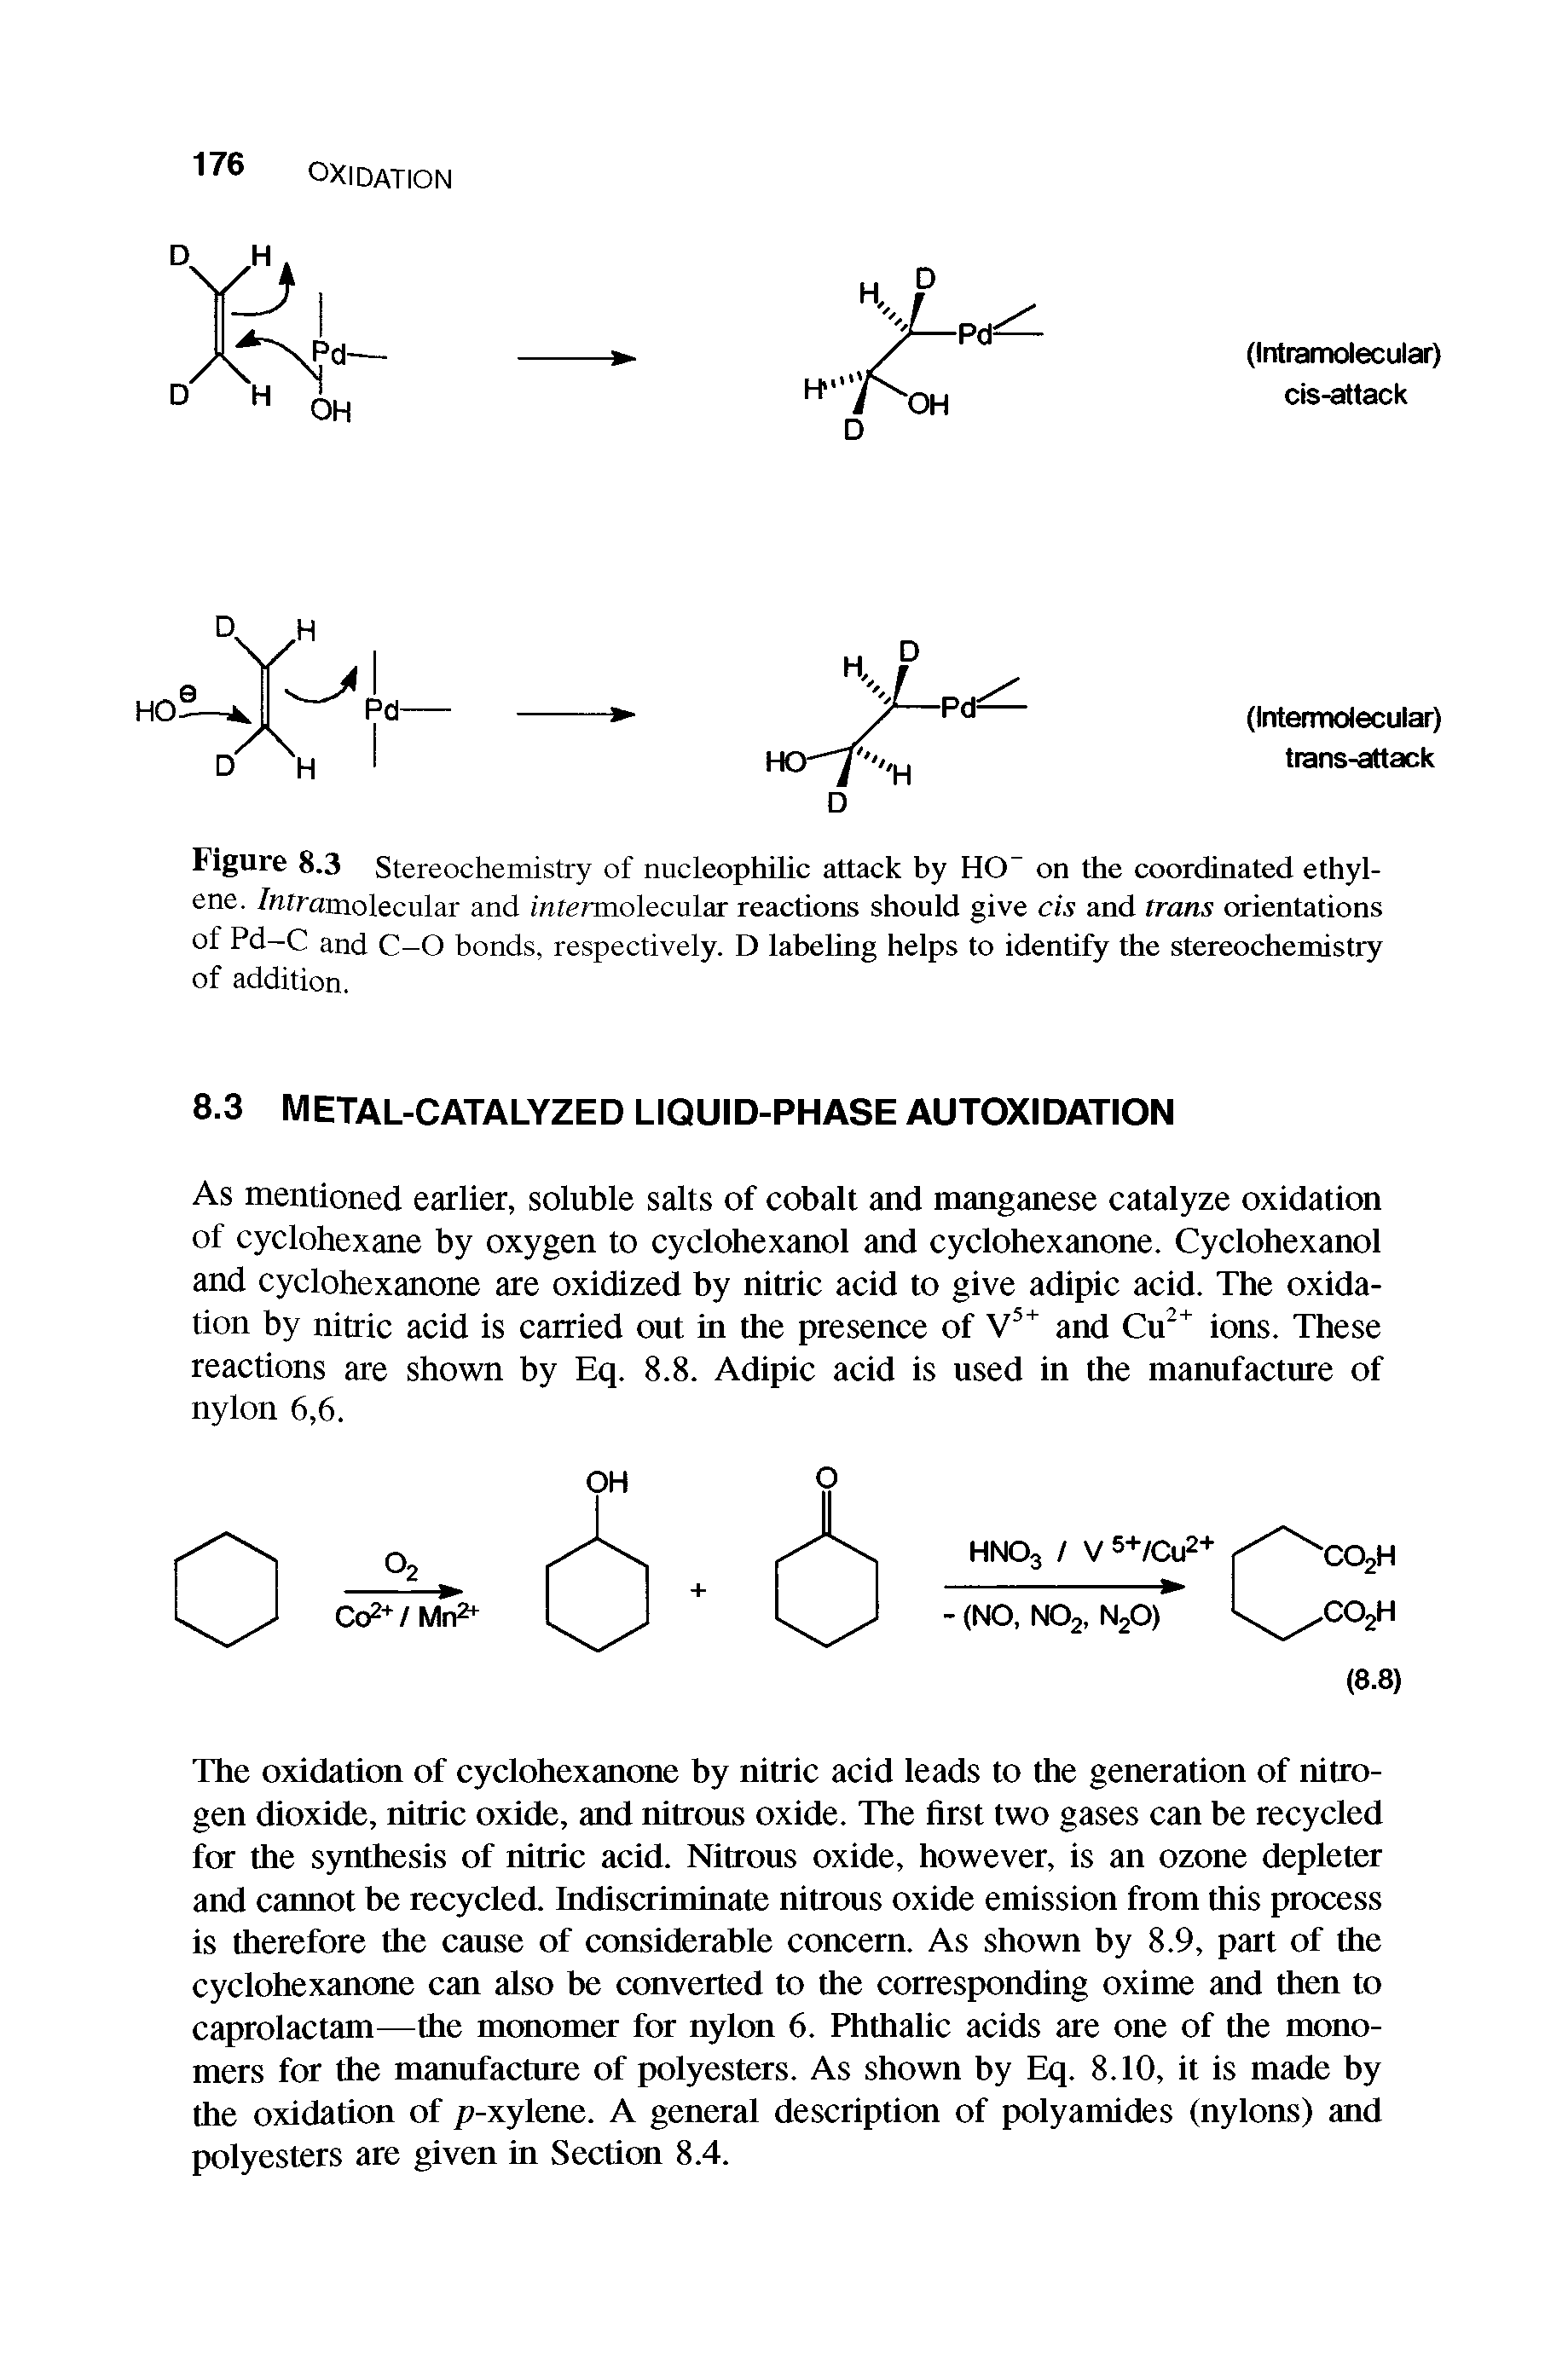 Figure 8.3 Stereochemistry of nucleophilic attack by HO- on the coordinated ethylene. /ratramolecular and i rarermolecular reactions should give cis and Irans orientations °f Pd-C and C-O bonds, respectively. D labeling helps to identify the stereochemistry of addition.